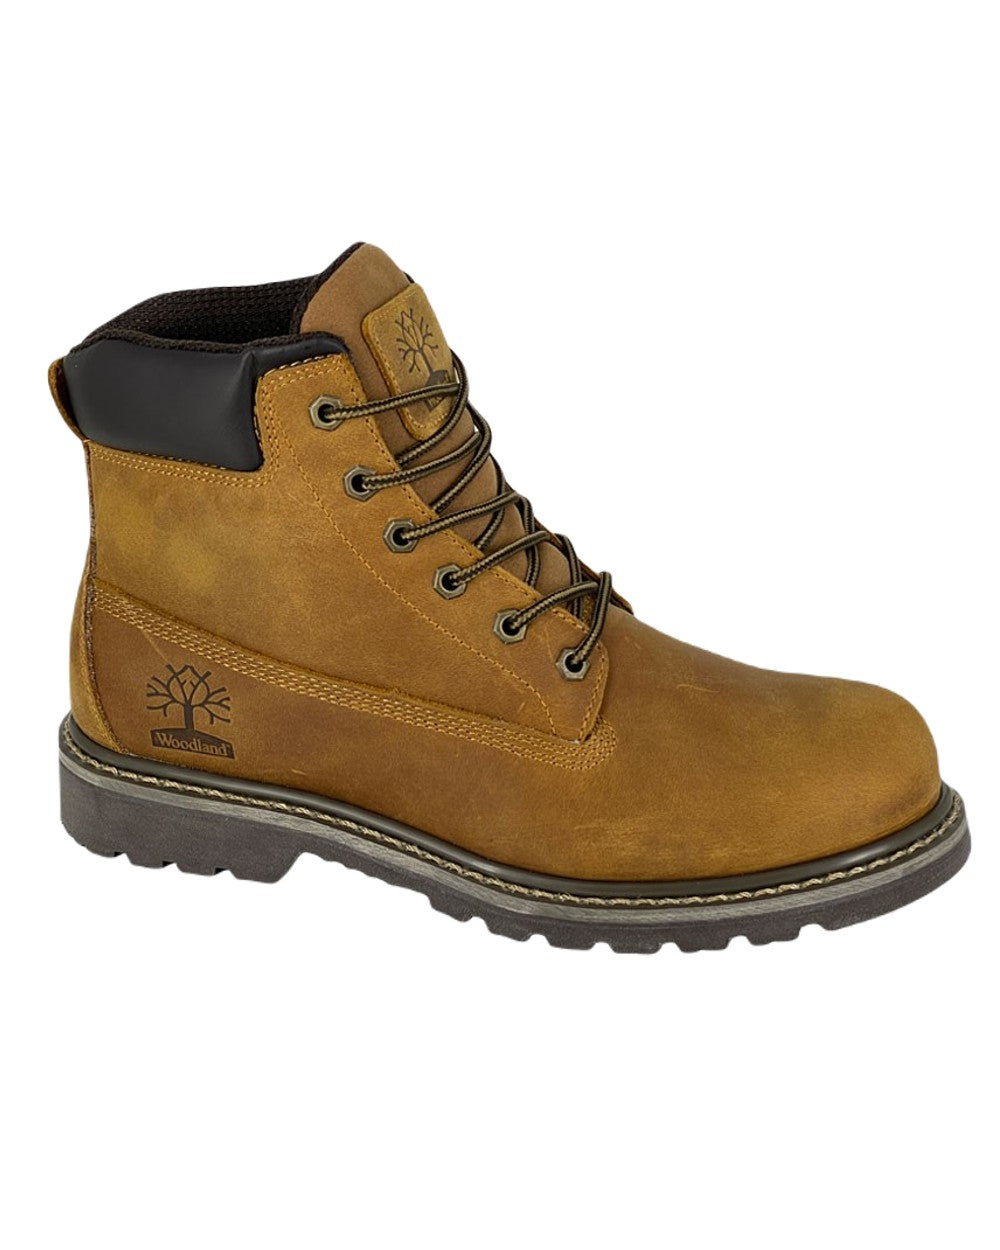 Woodland 6 Eye Padded Utility Work Boots In Light Brown 